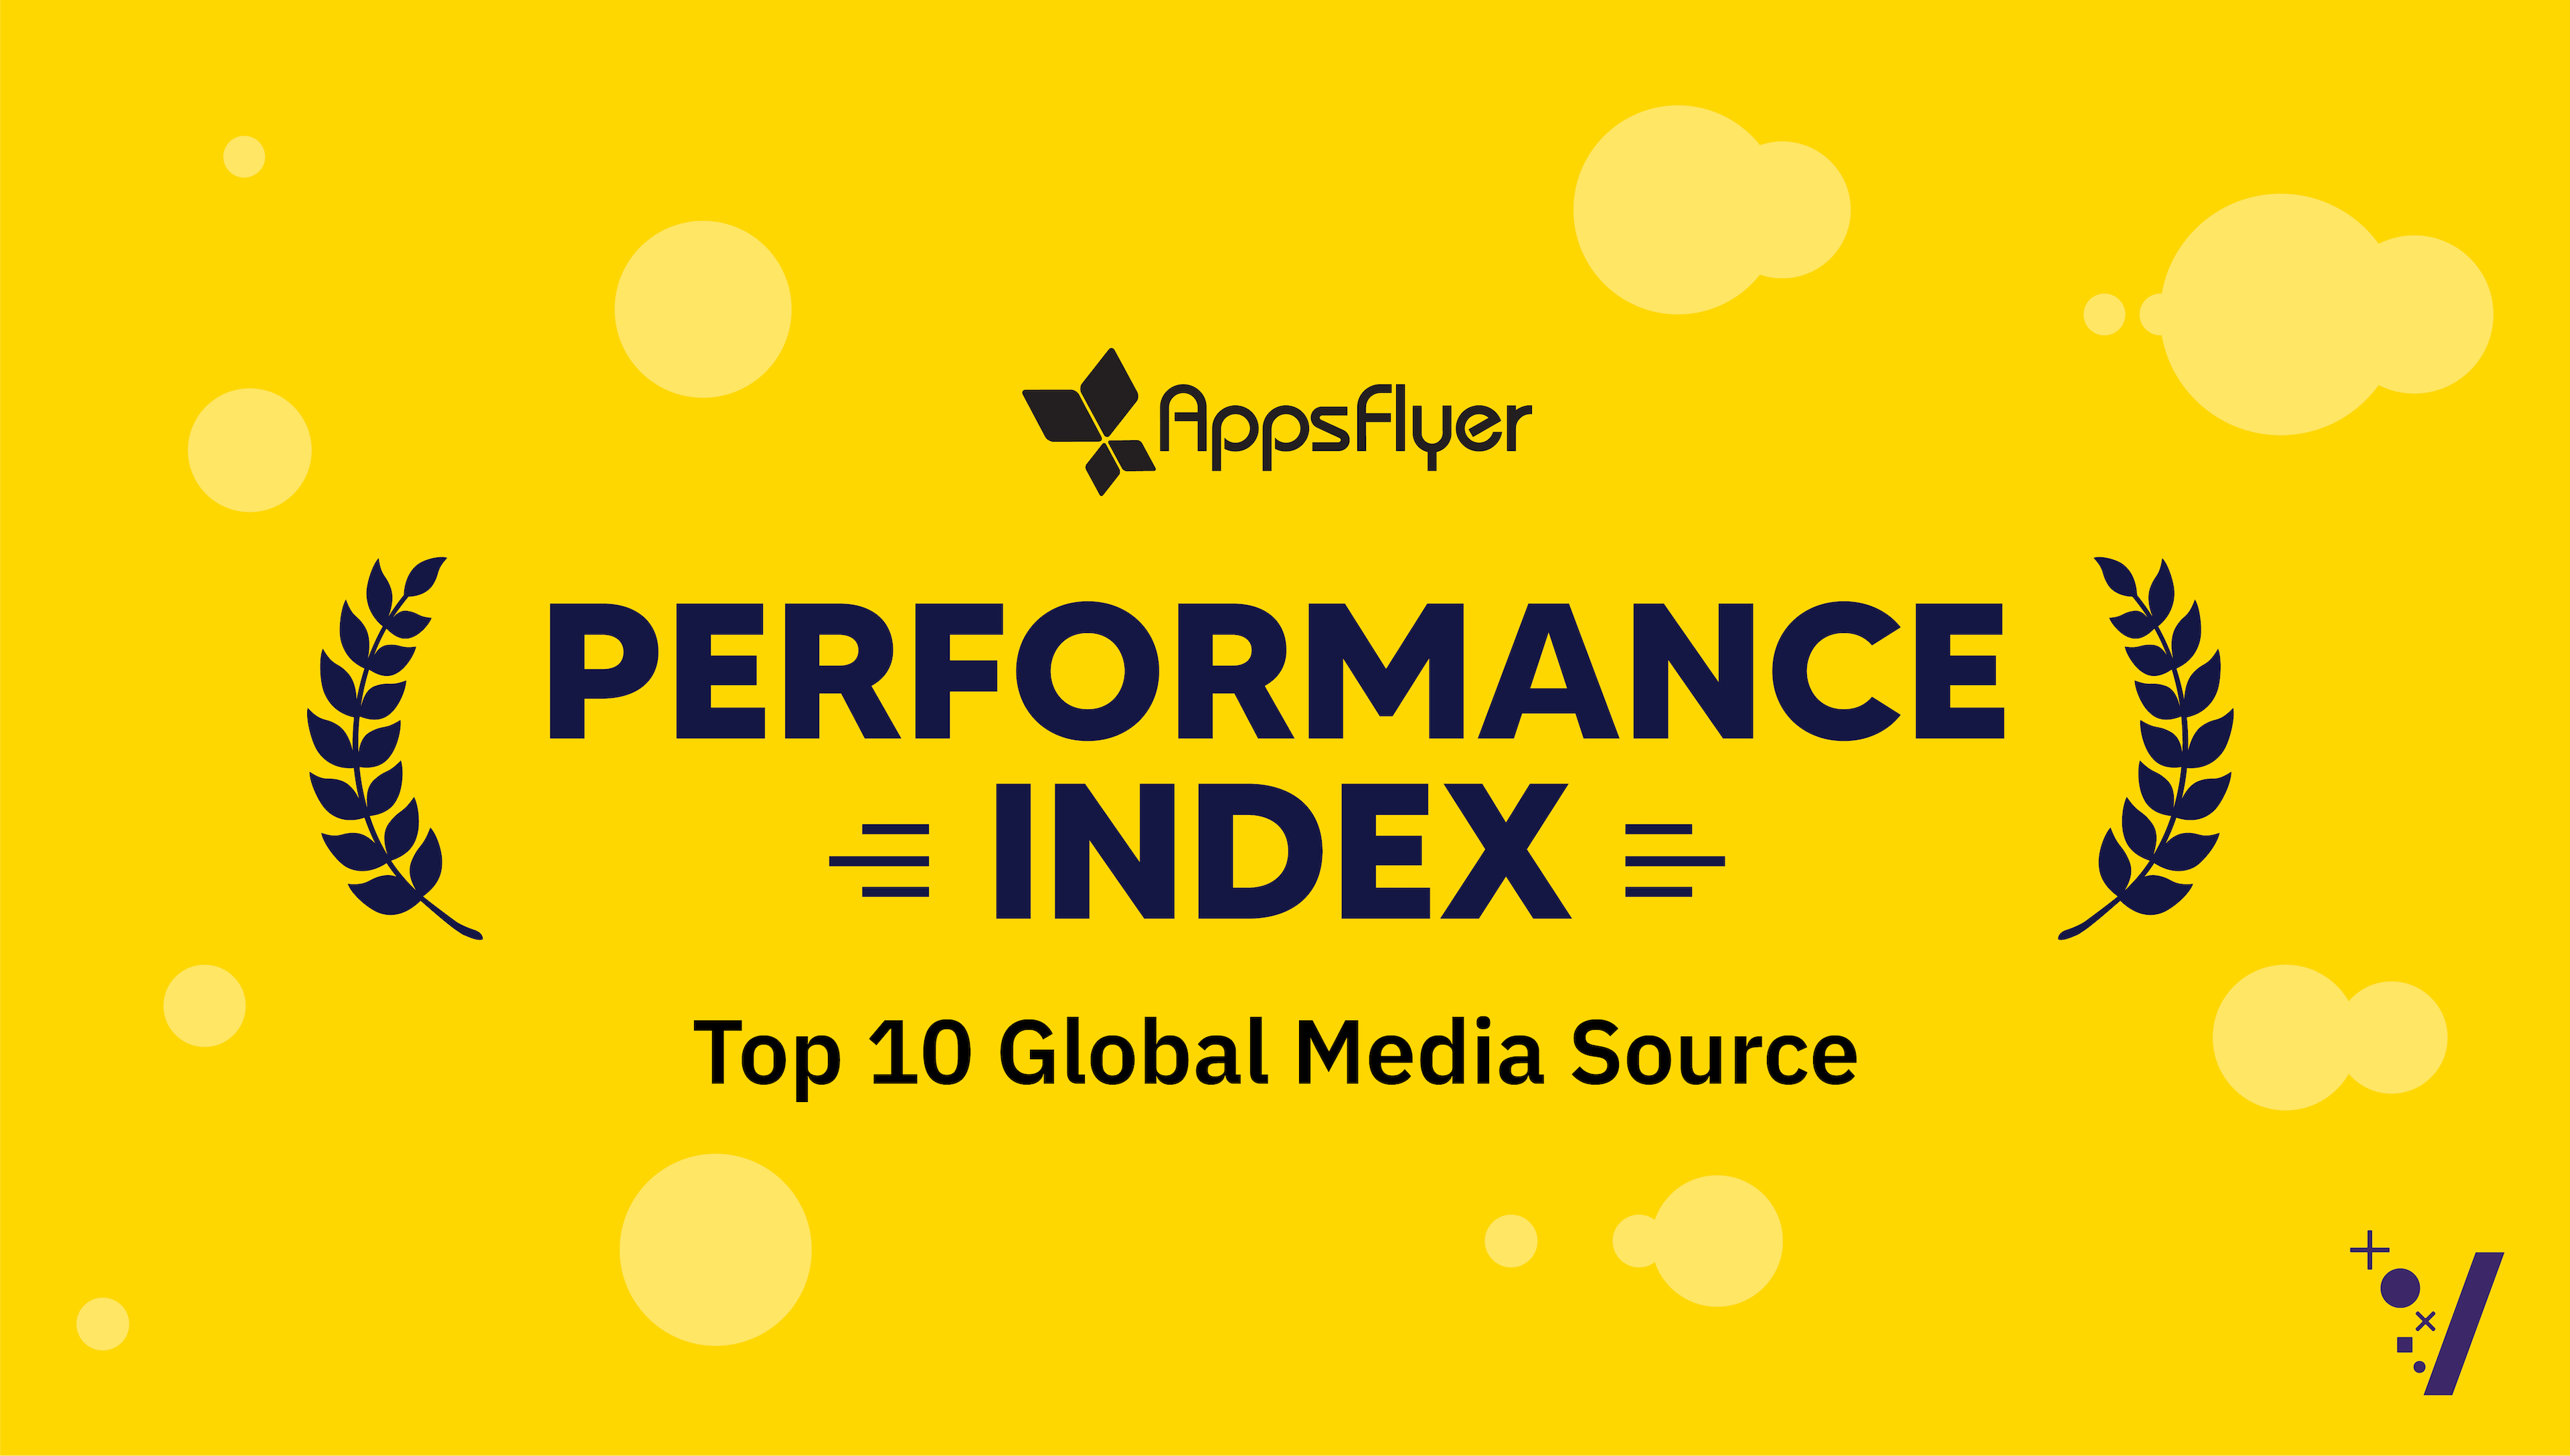 Vungle Recognized as a Top 10 Global Media Source in AppsFlyer Performance Index XII